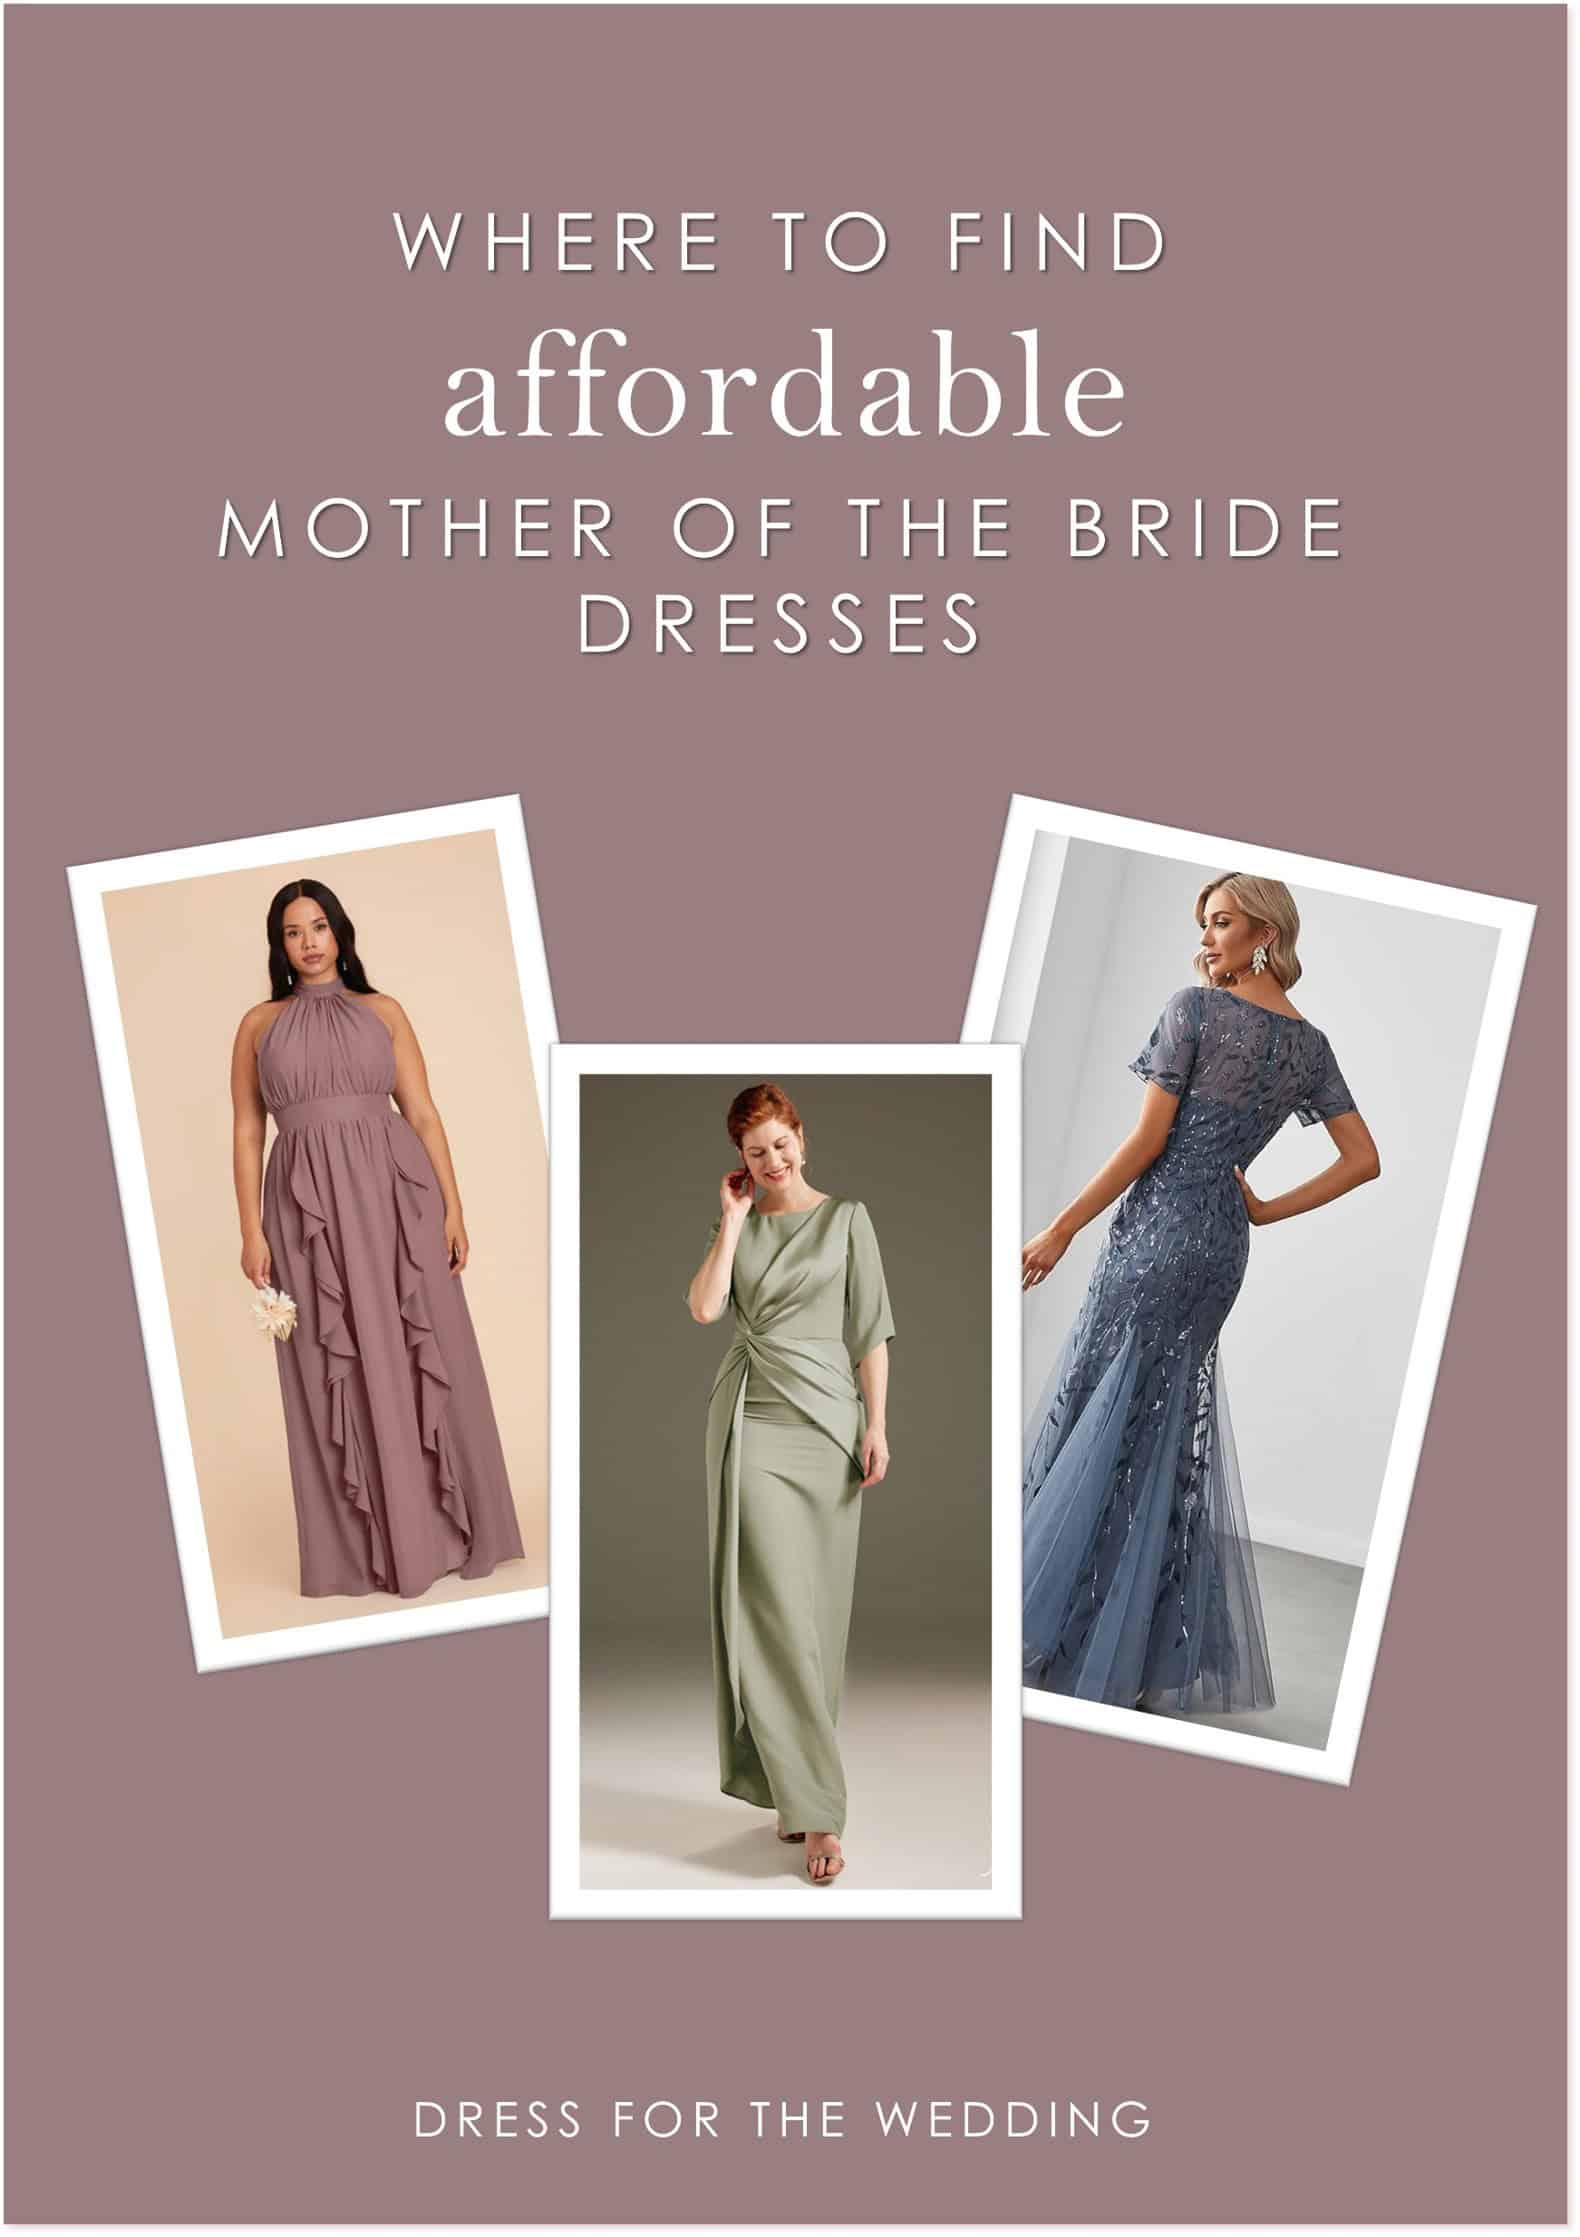 Affordable Mother of the Bride Dresses - Dress for the Wedding